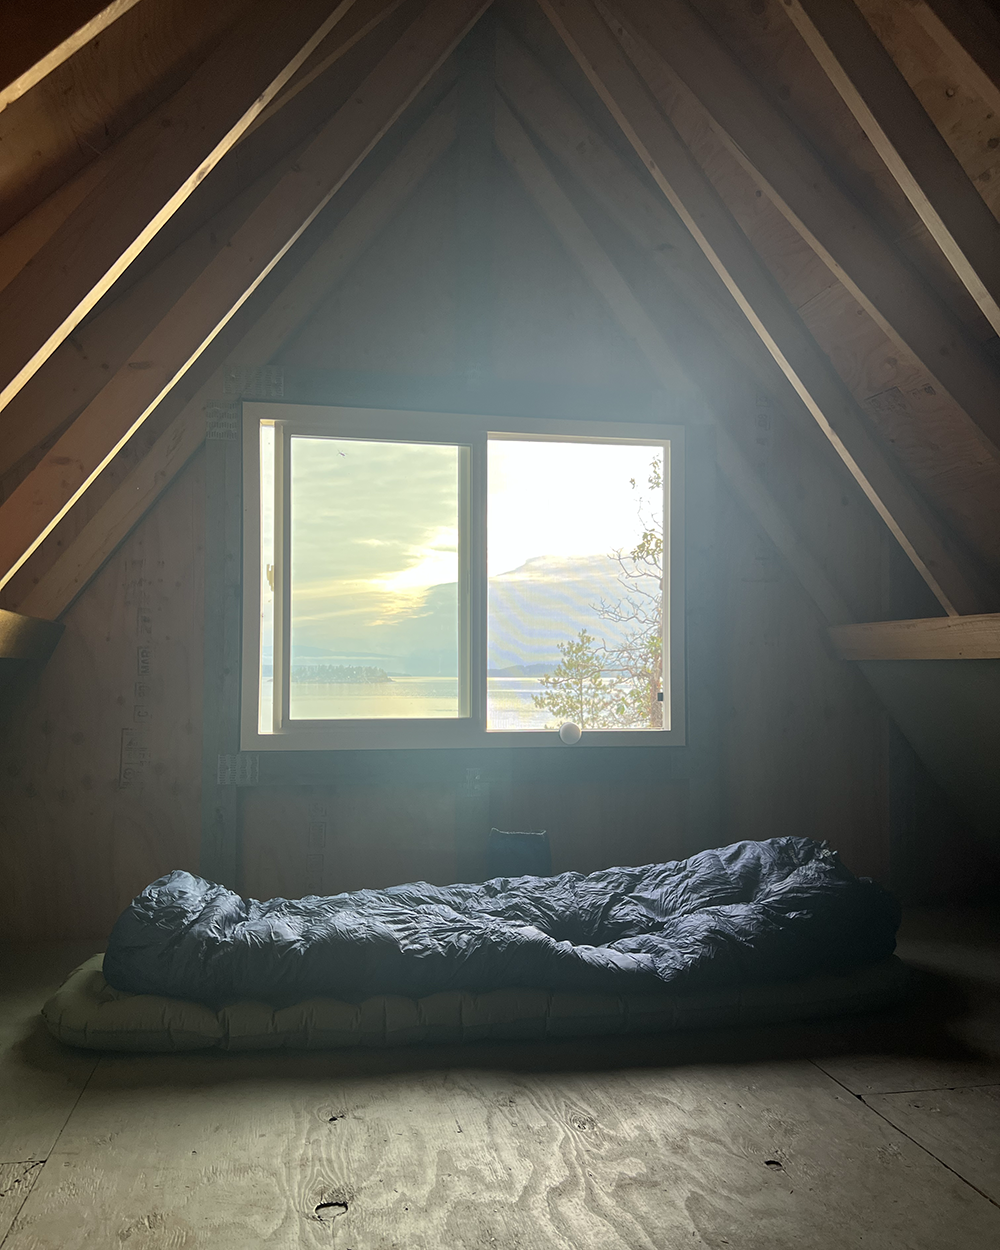  Lovely window views of the ocean from upstairs in the Sarah Point Hut.  